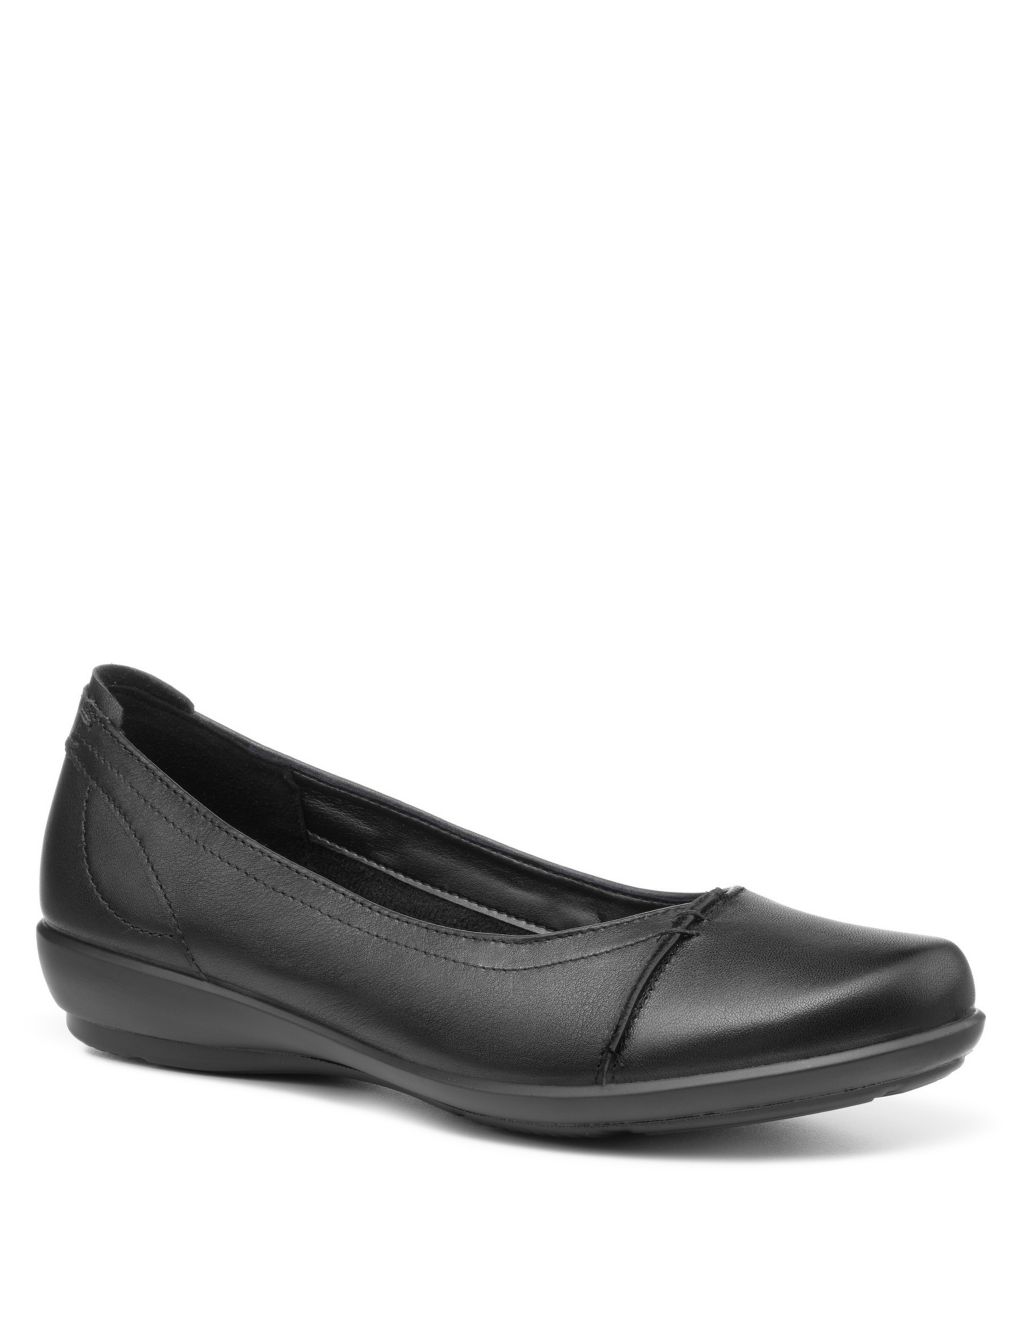 Robyn II Leather Ballet Pumps | Hotter | M&S